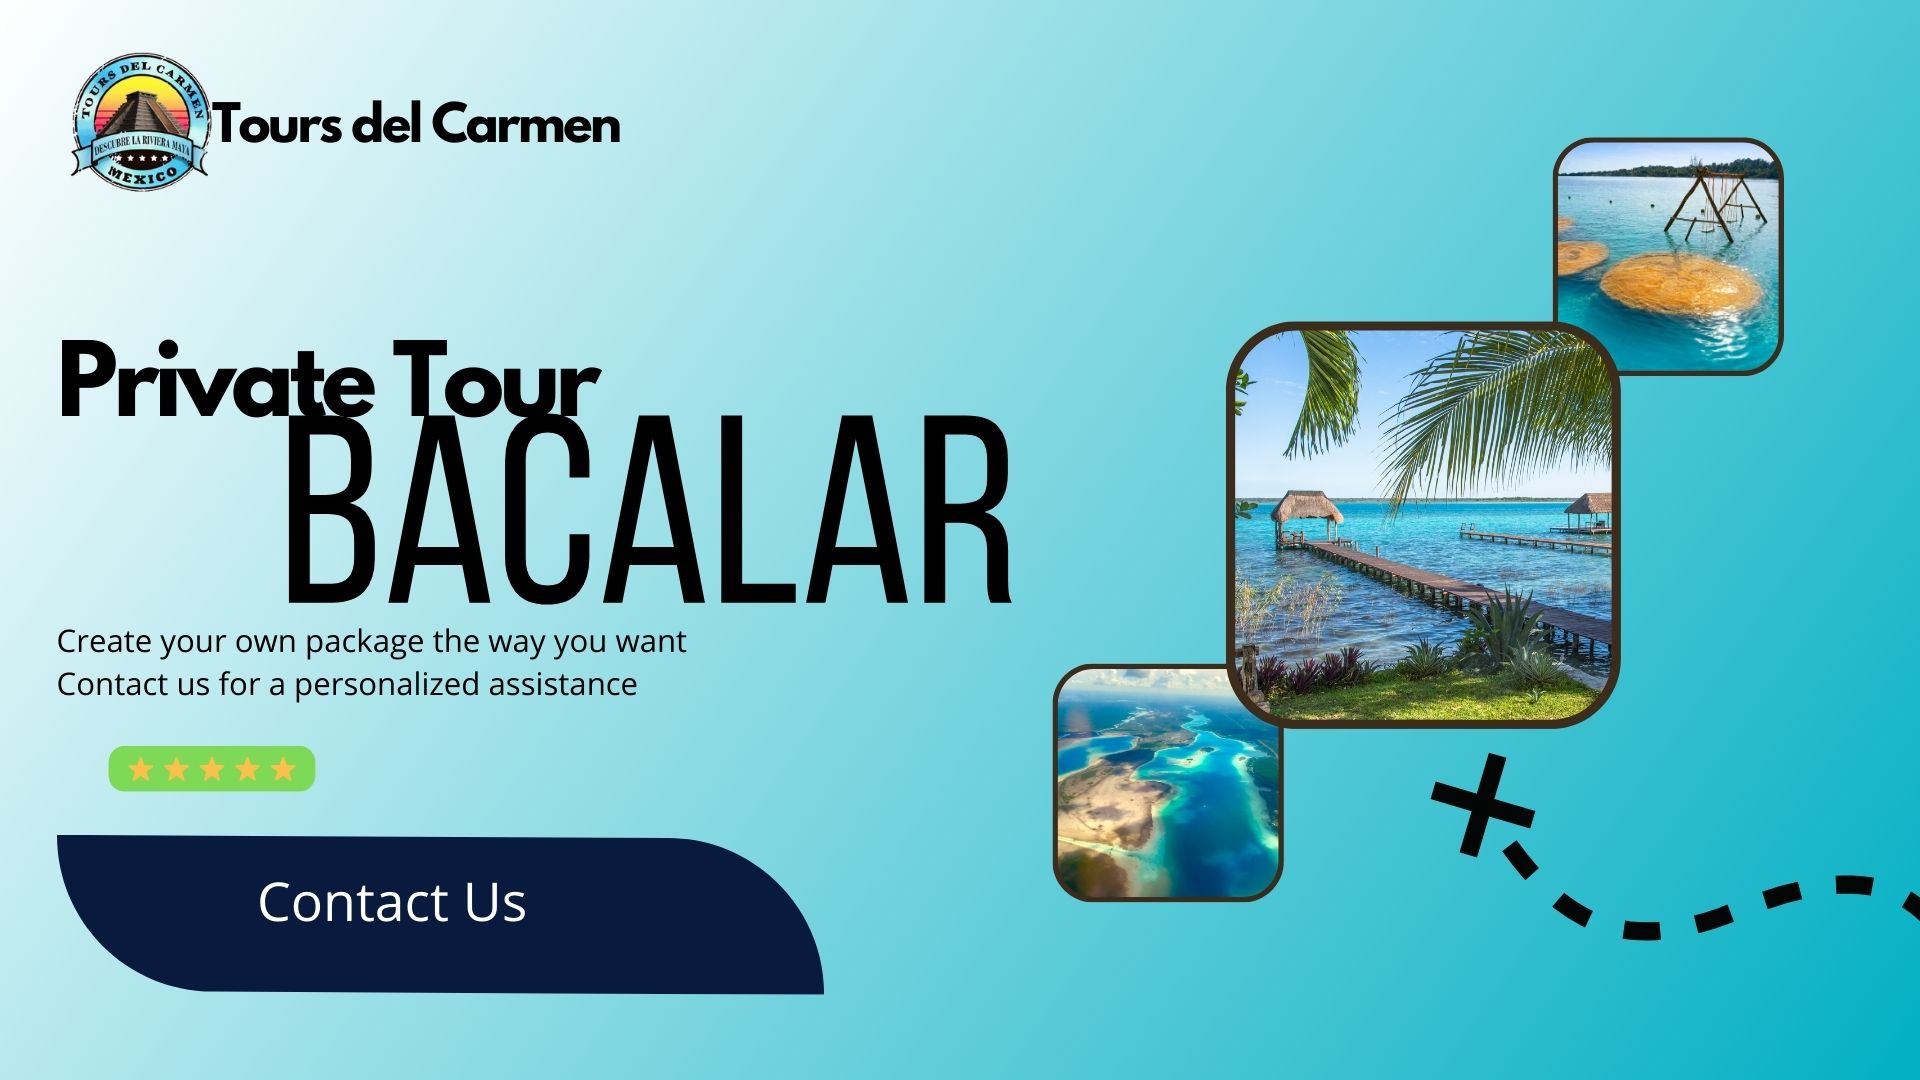 Bacalar - Private Tour